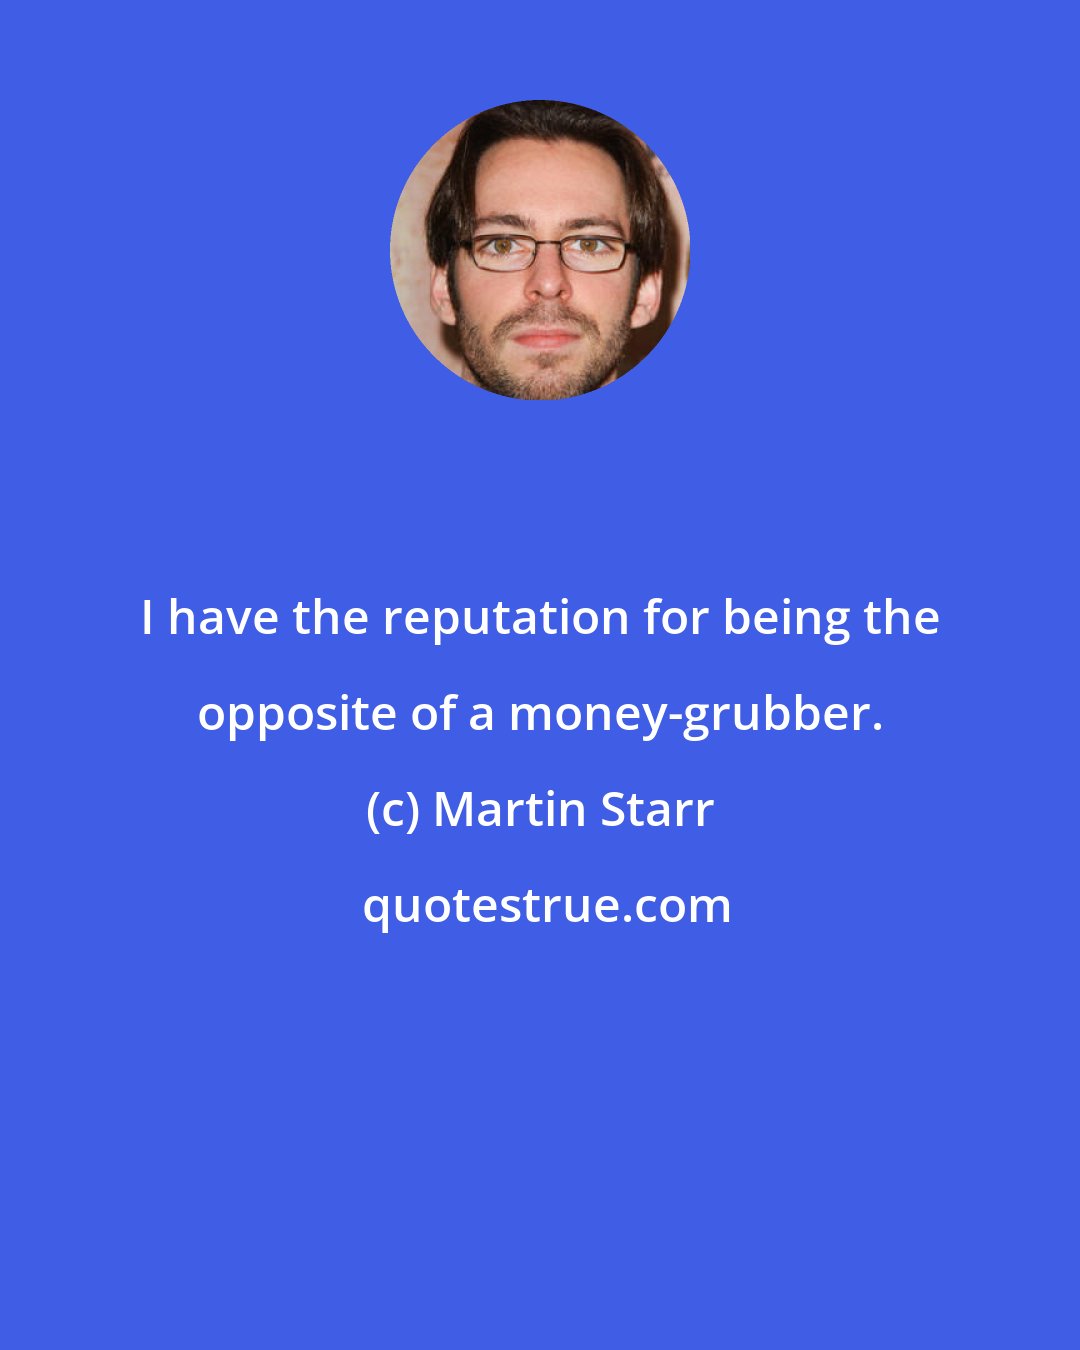 Martin Starr: I have the reputation for being the opposite of a money-grubber.